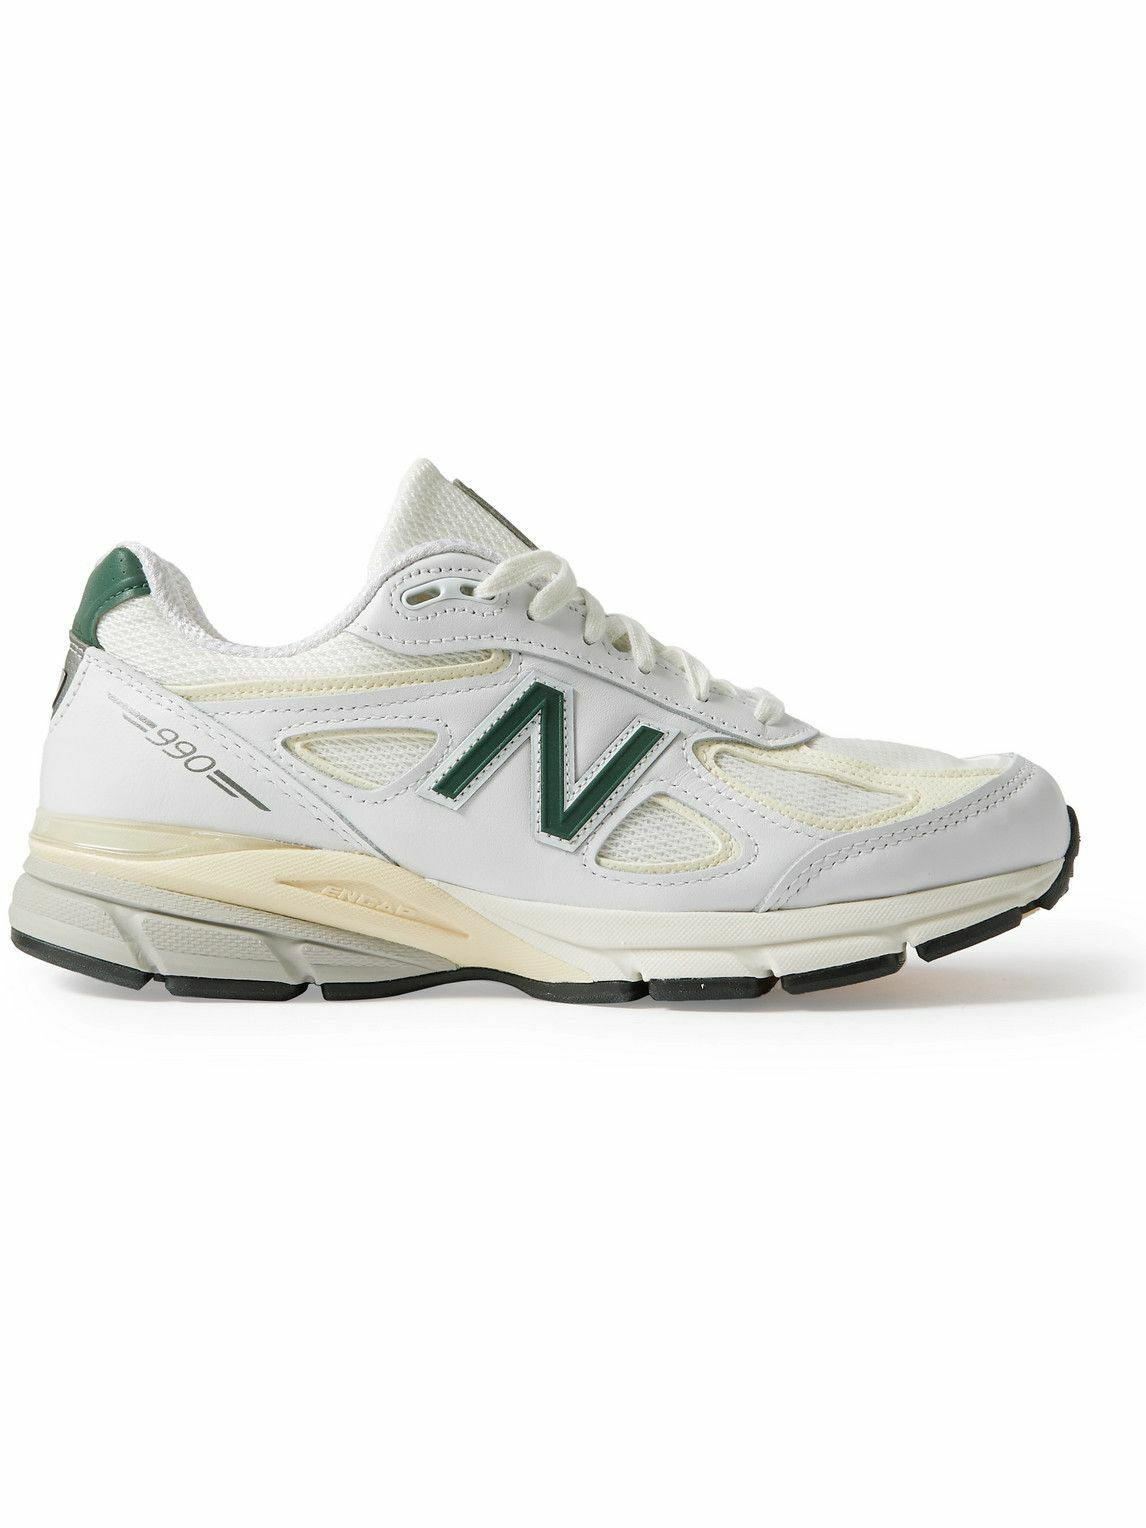 New Balance - MADE in USA 990v4 Leather and Mesh Sneakers - White New ...